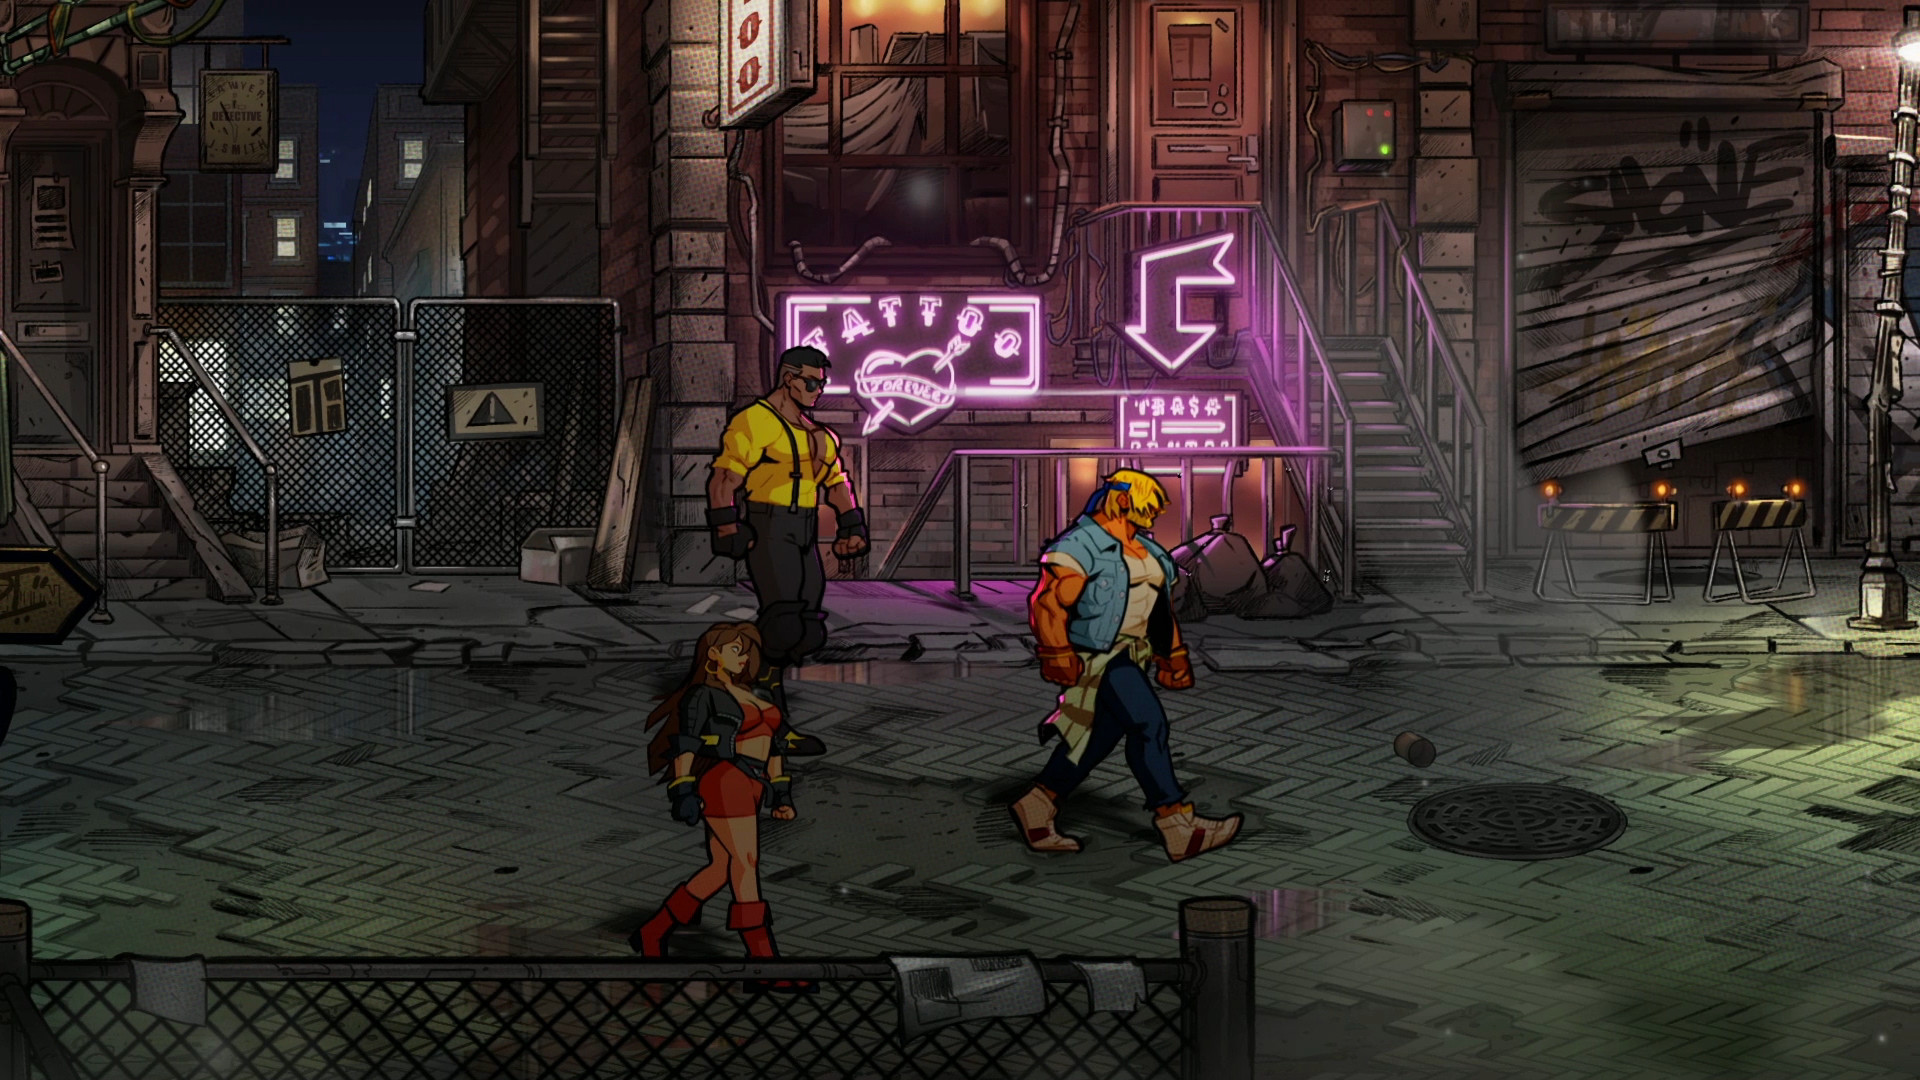 Streets of Rage 4 unlockable characters